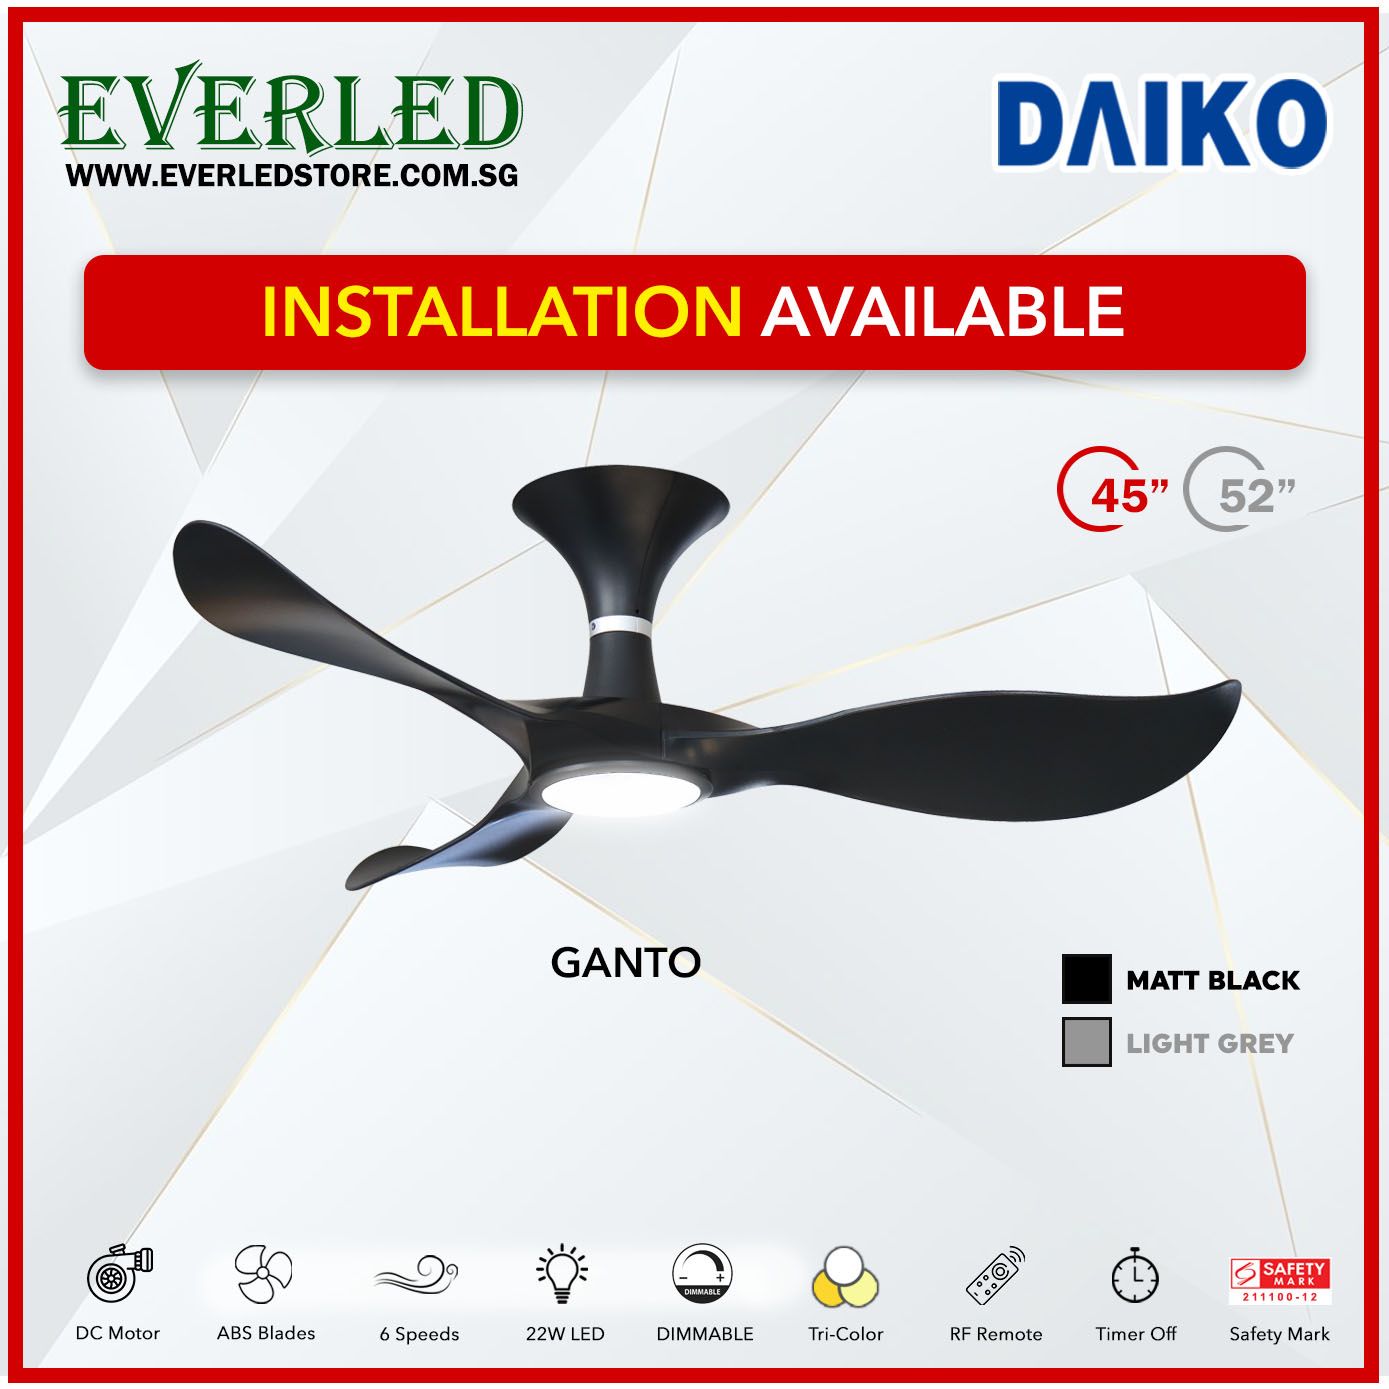 Daiko DC Ganto 45"/52" with Dimmable Tri-color LED (Inverter DC Fan)